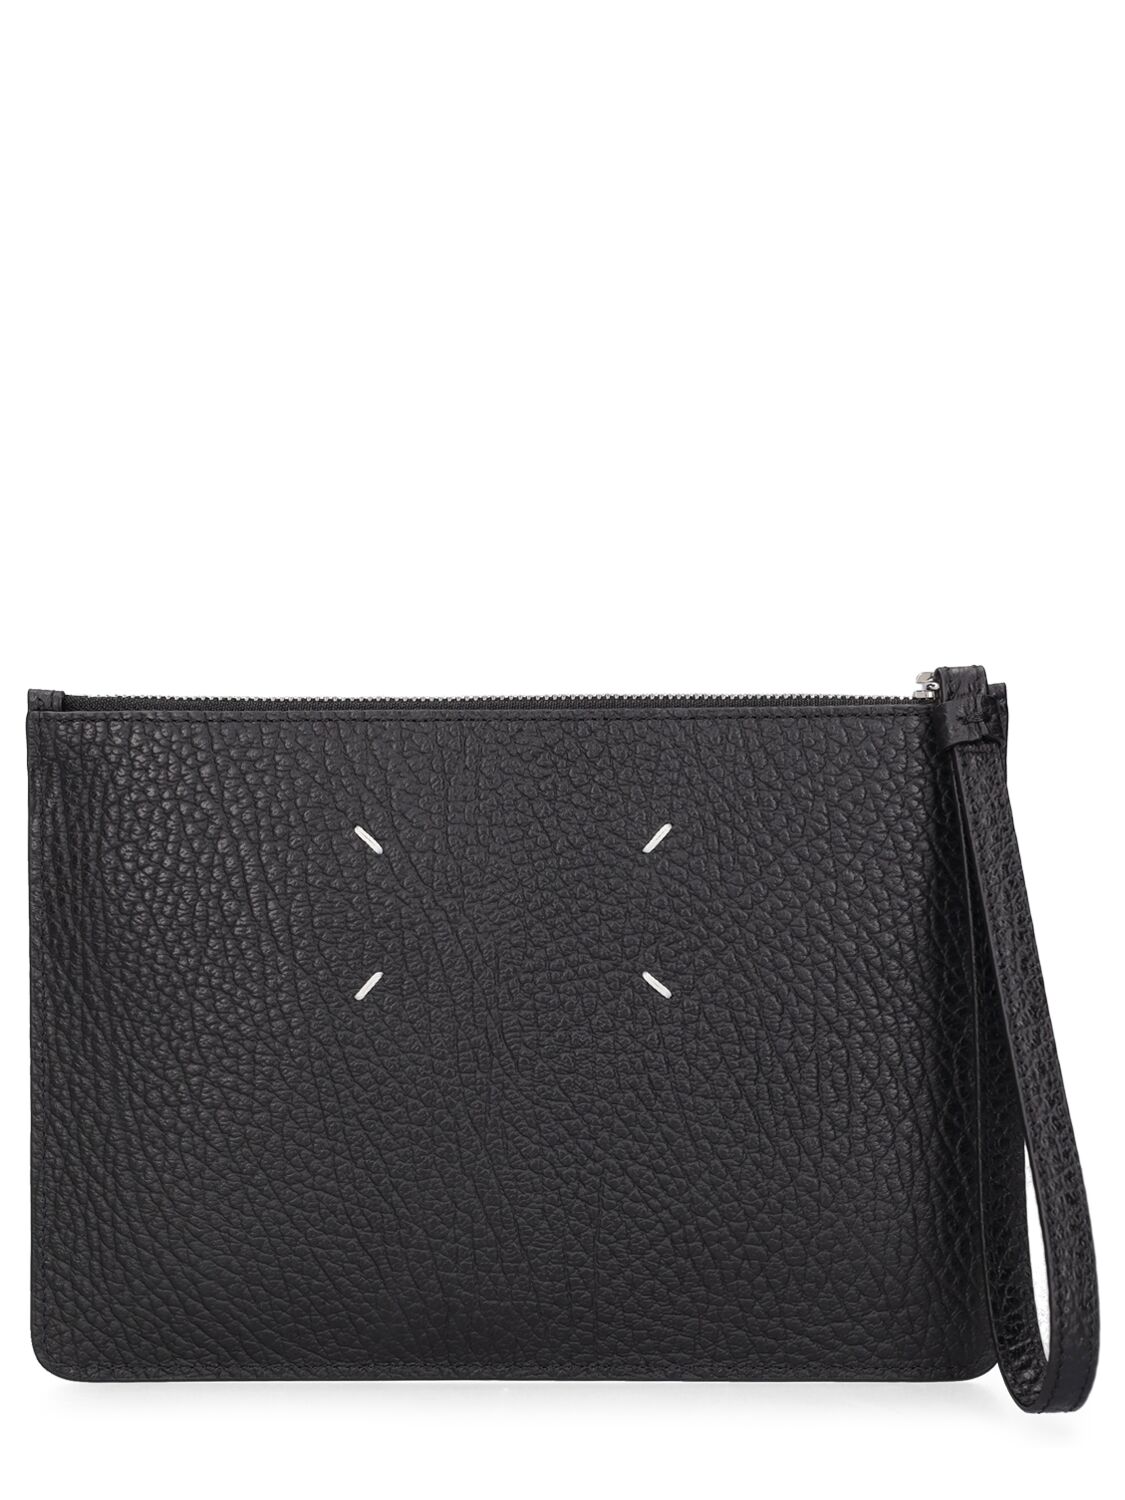 Maison Margiela Small Grained Leather Pouch In Black